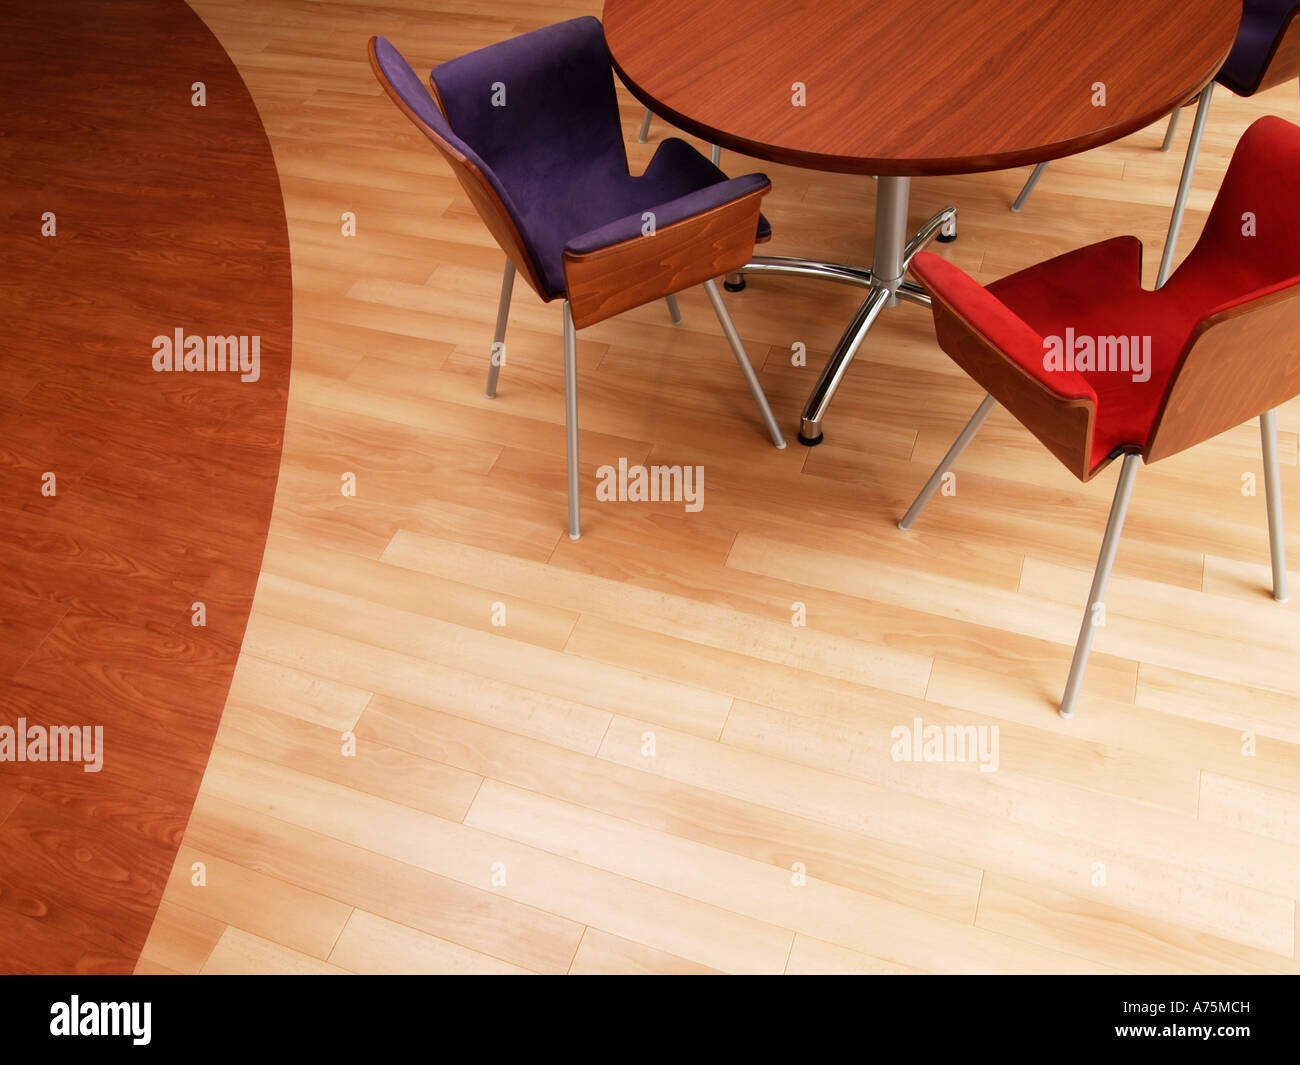 Birds eye view of round wooden table with modern design chairs on parquet floor made of two kinds of wood Stock Photo